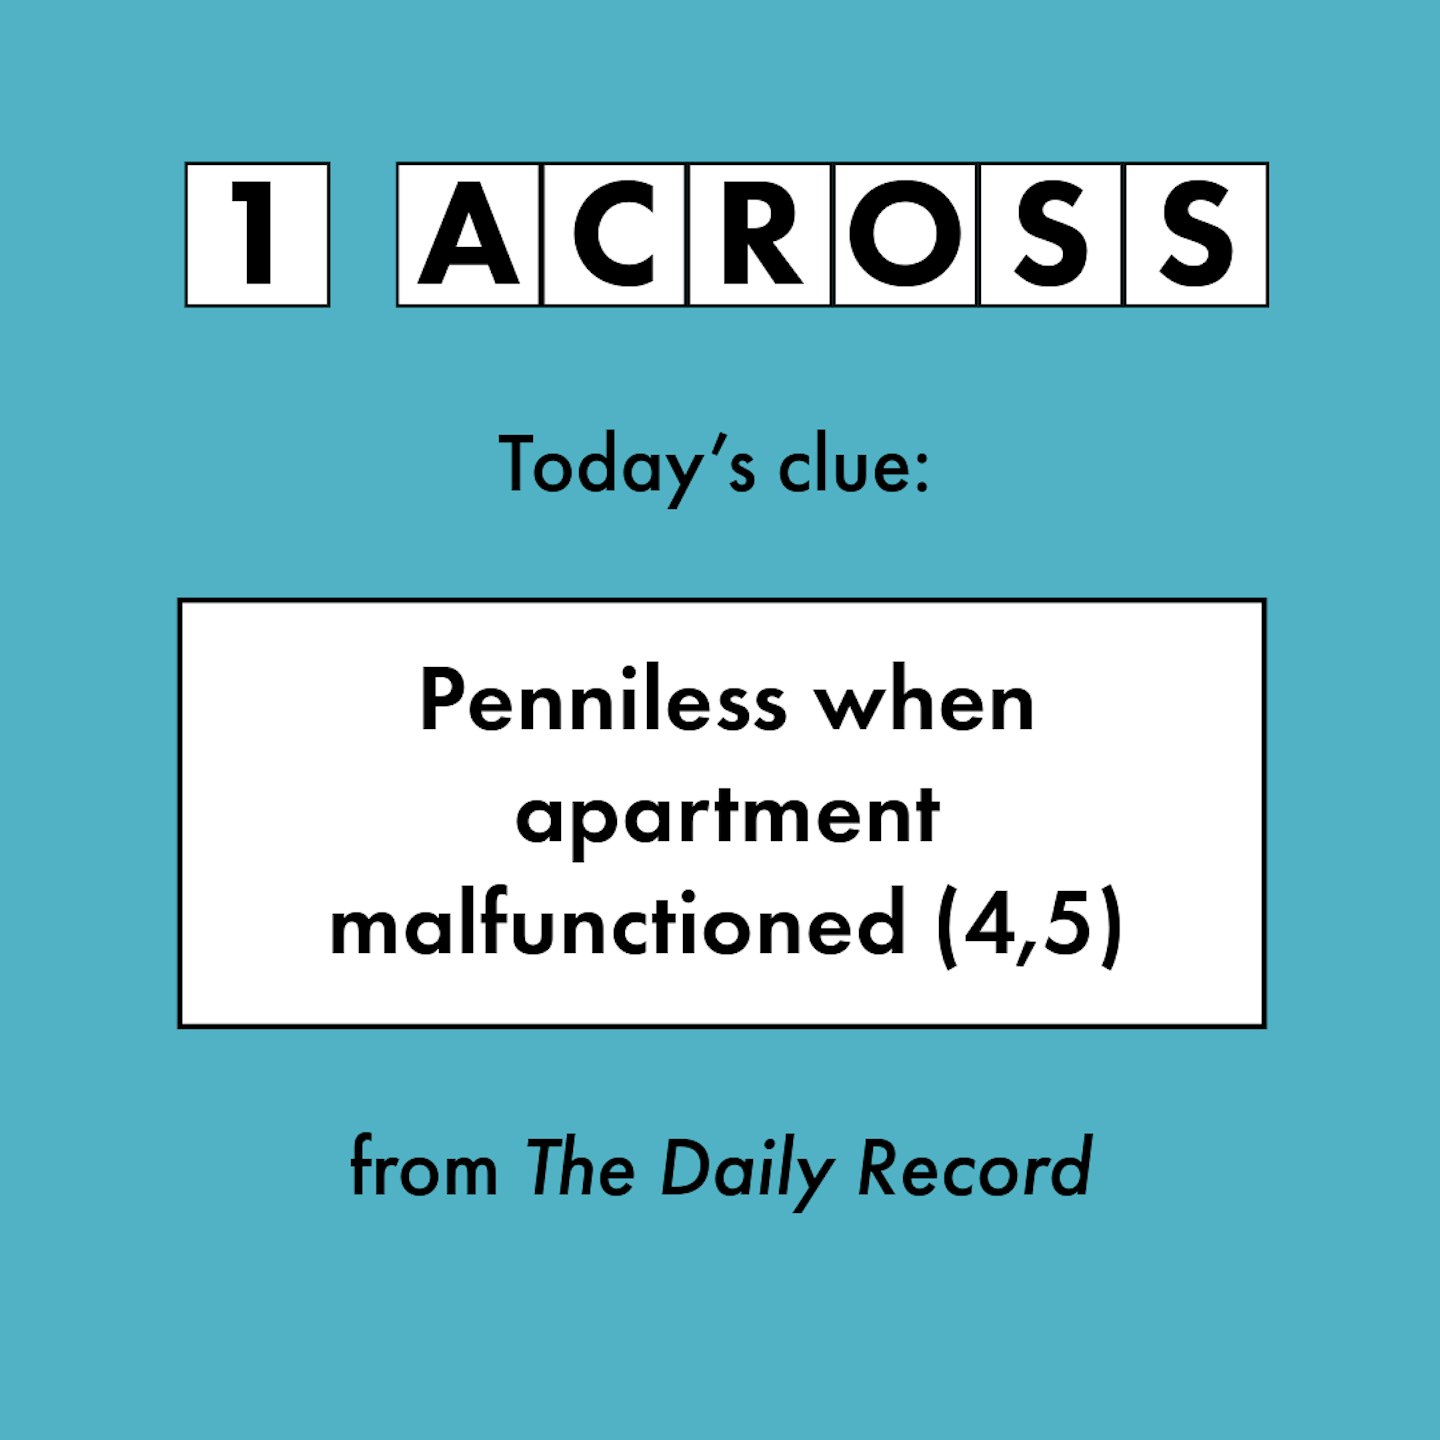 1 Across: a cryptic crossword clue breakdown Penniless when apartment